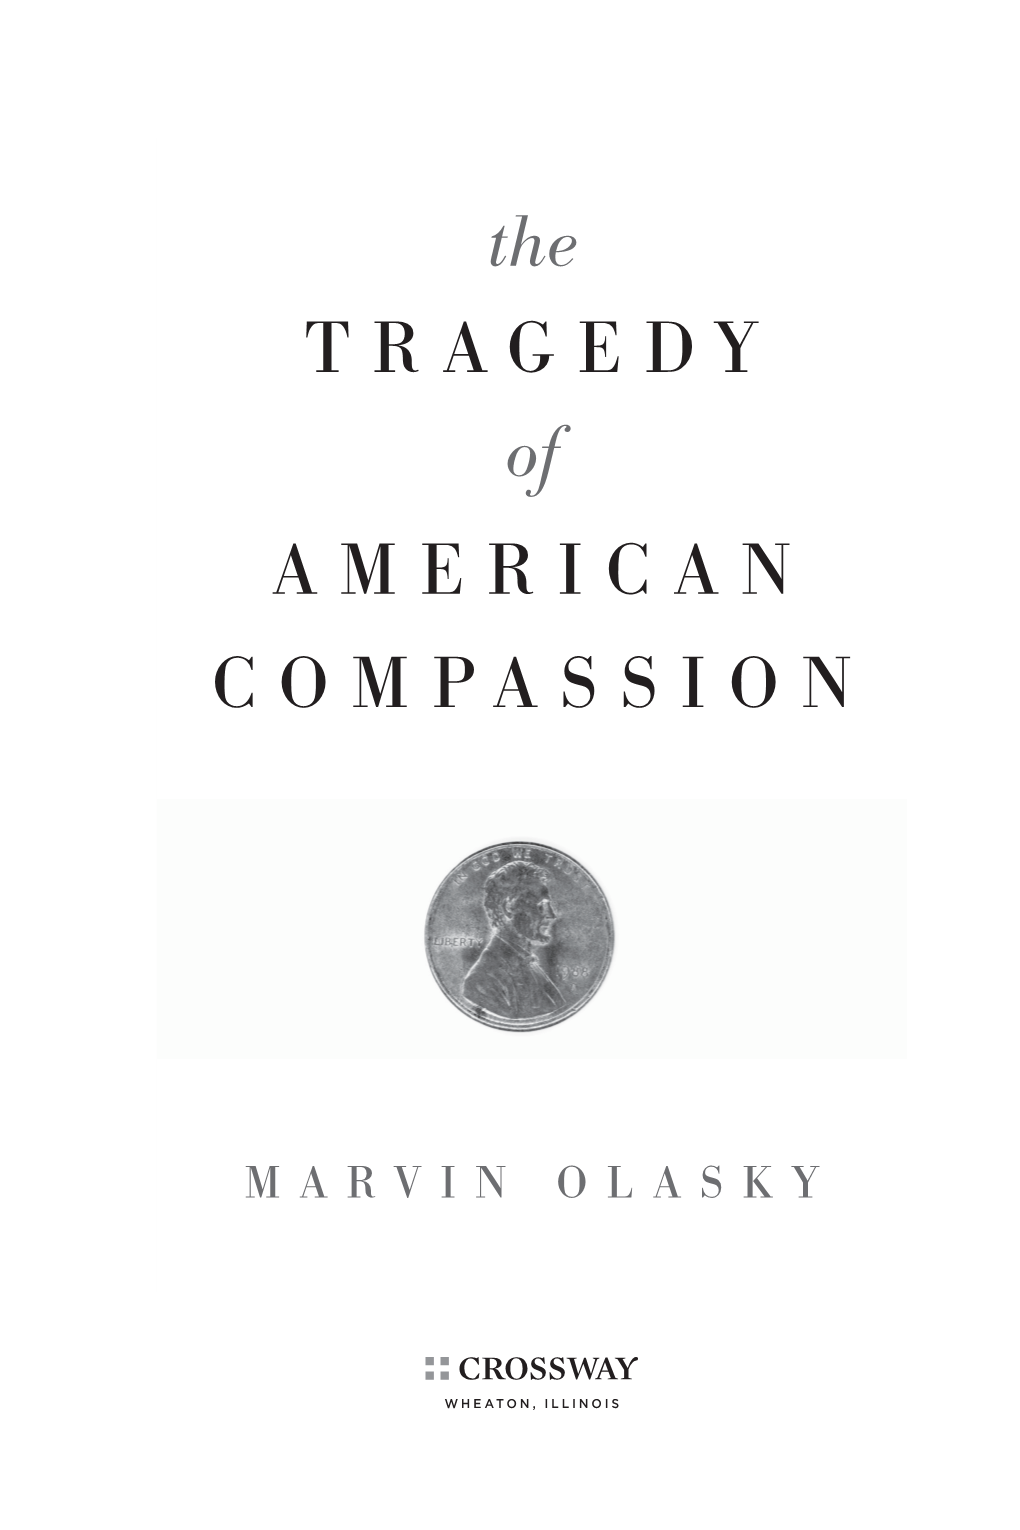 The TRAGEDY of AMERICAN COMPASSION